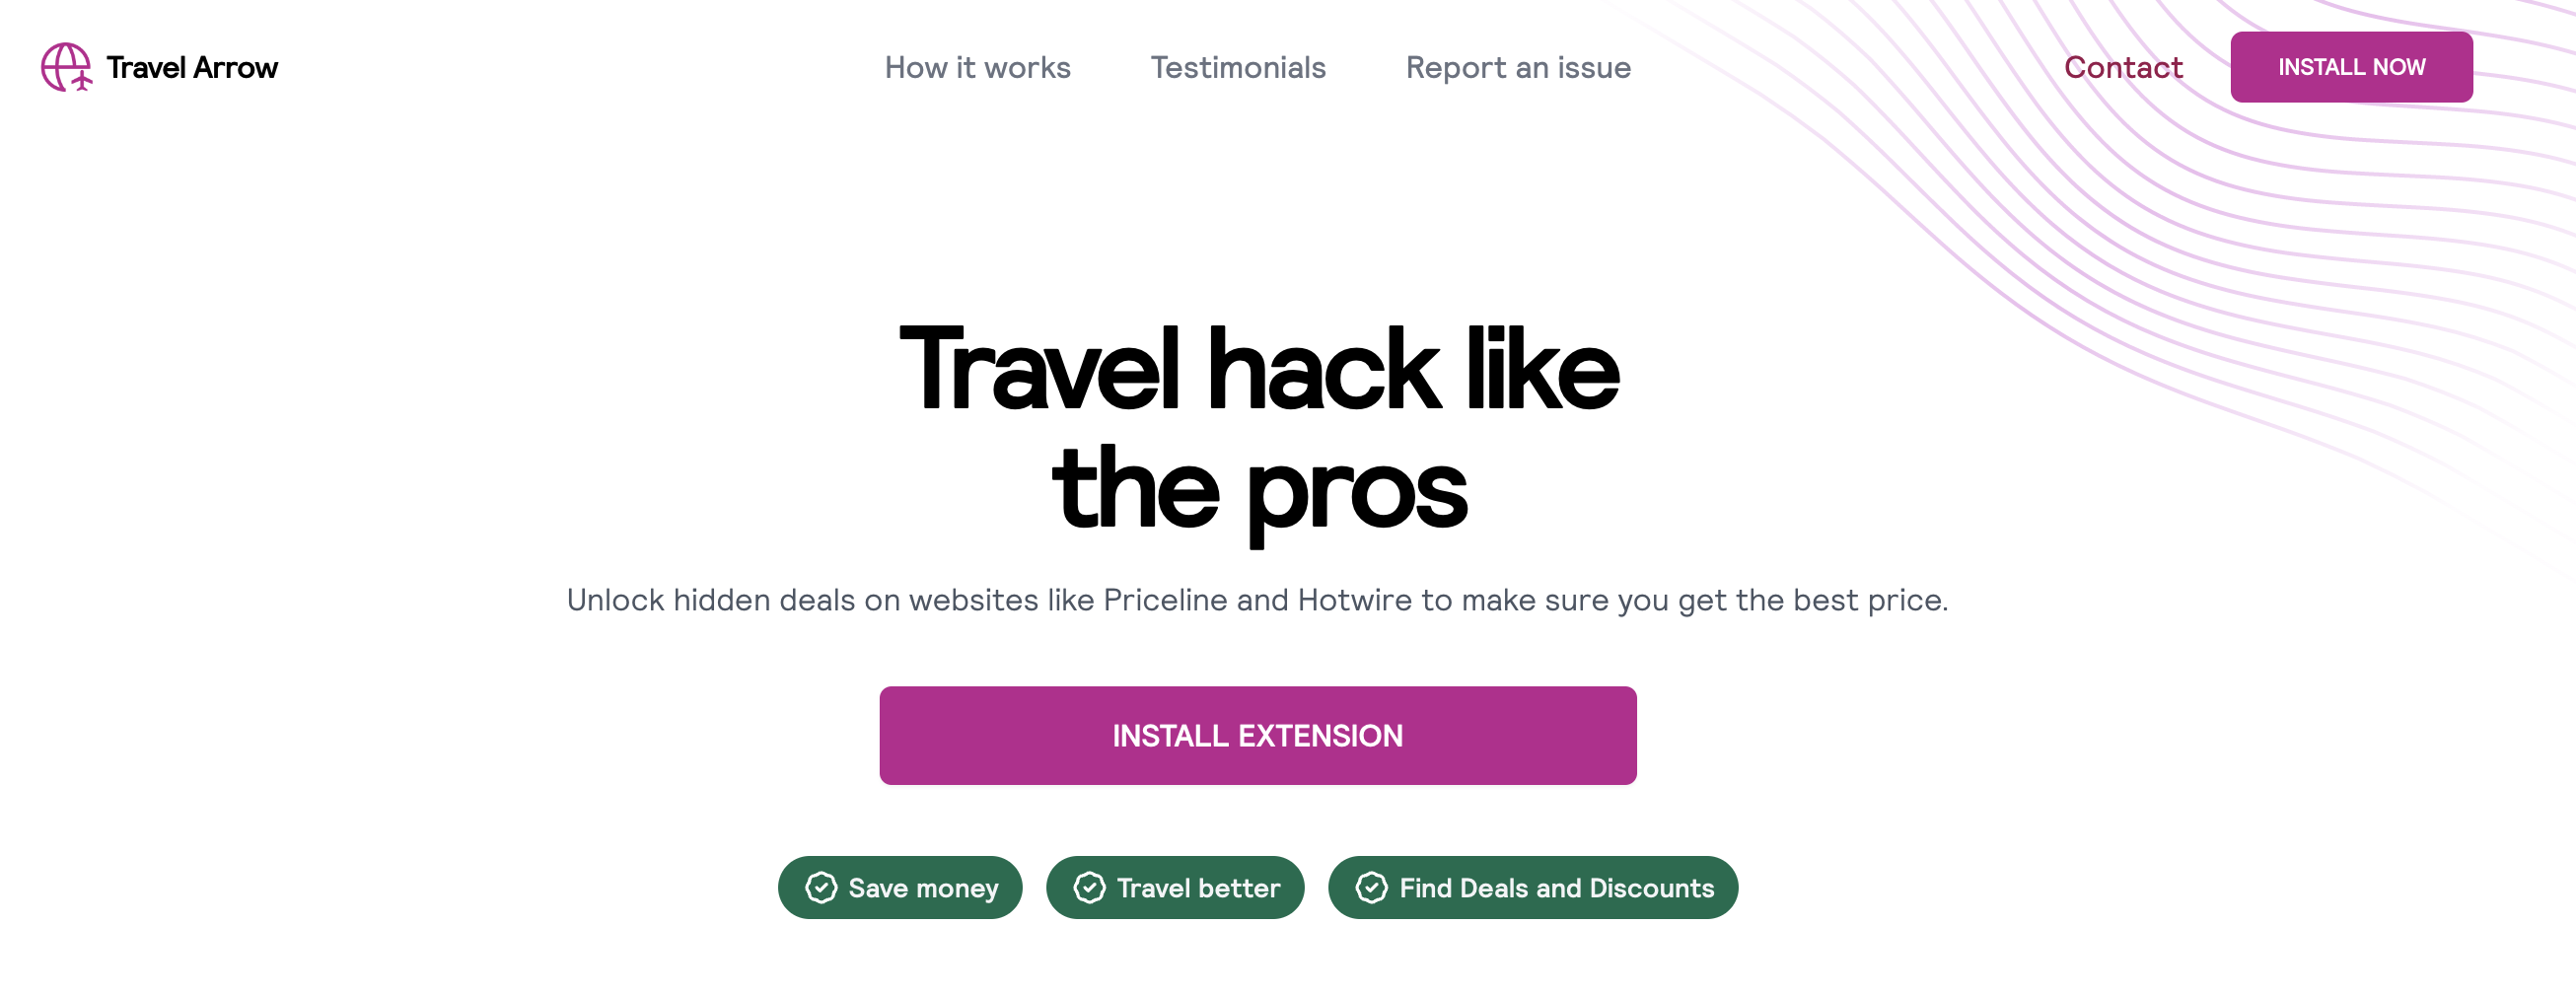 New Tool reveals hidden hotels on Priceline Express Deals and Hotwire Hot Deals - TravelArrow.io (1)